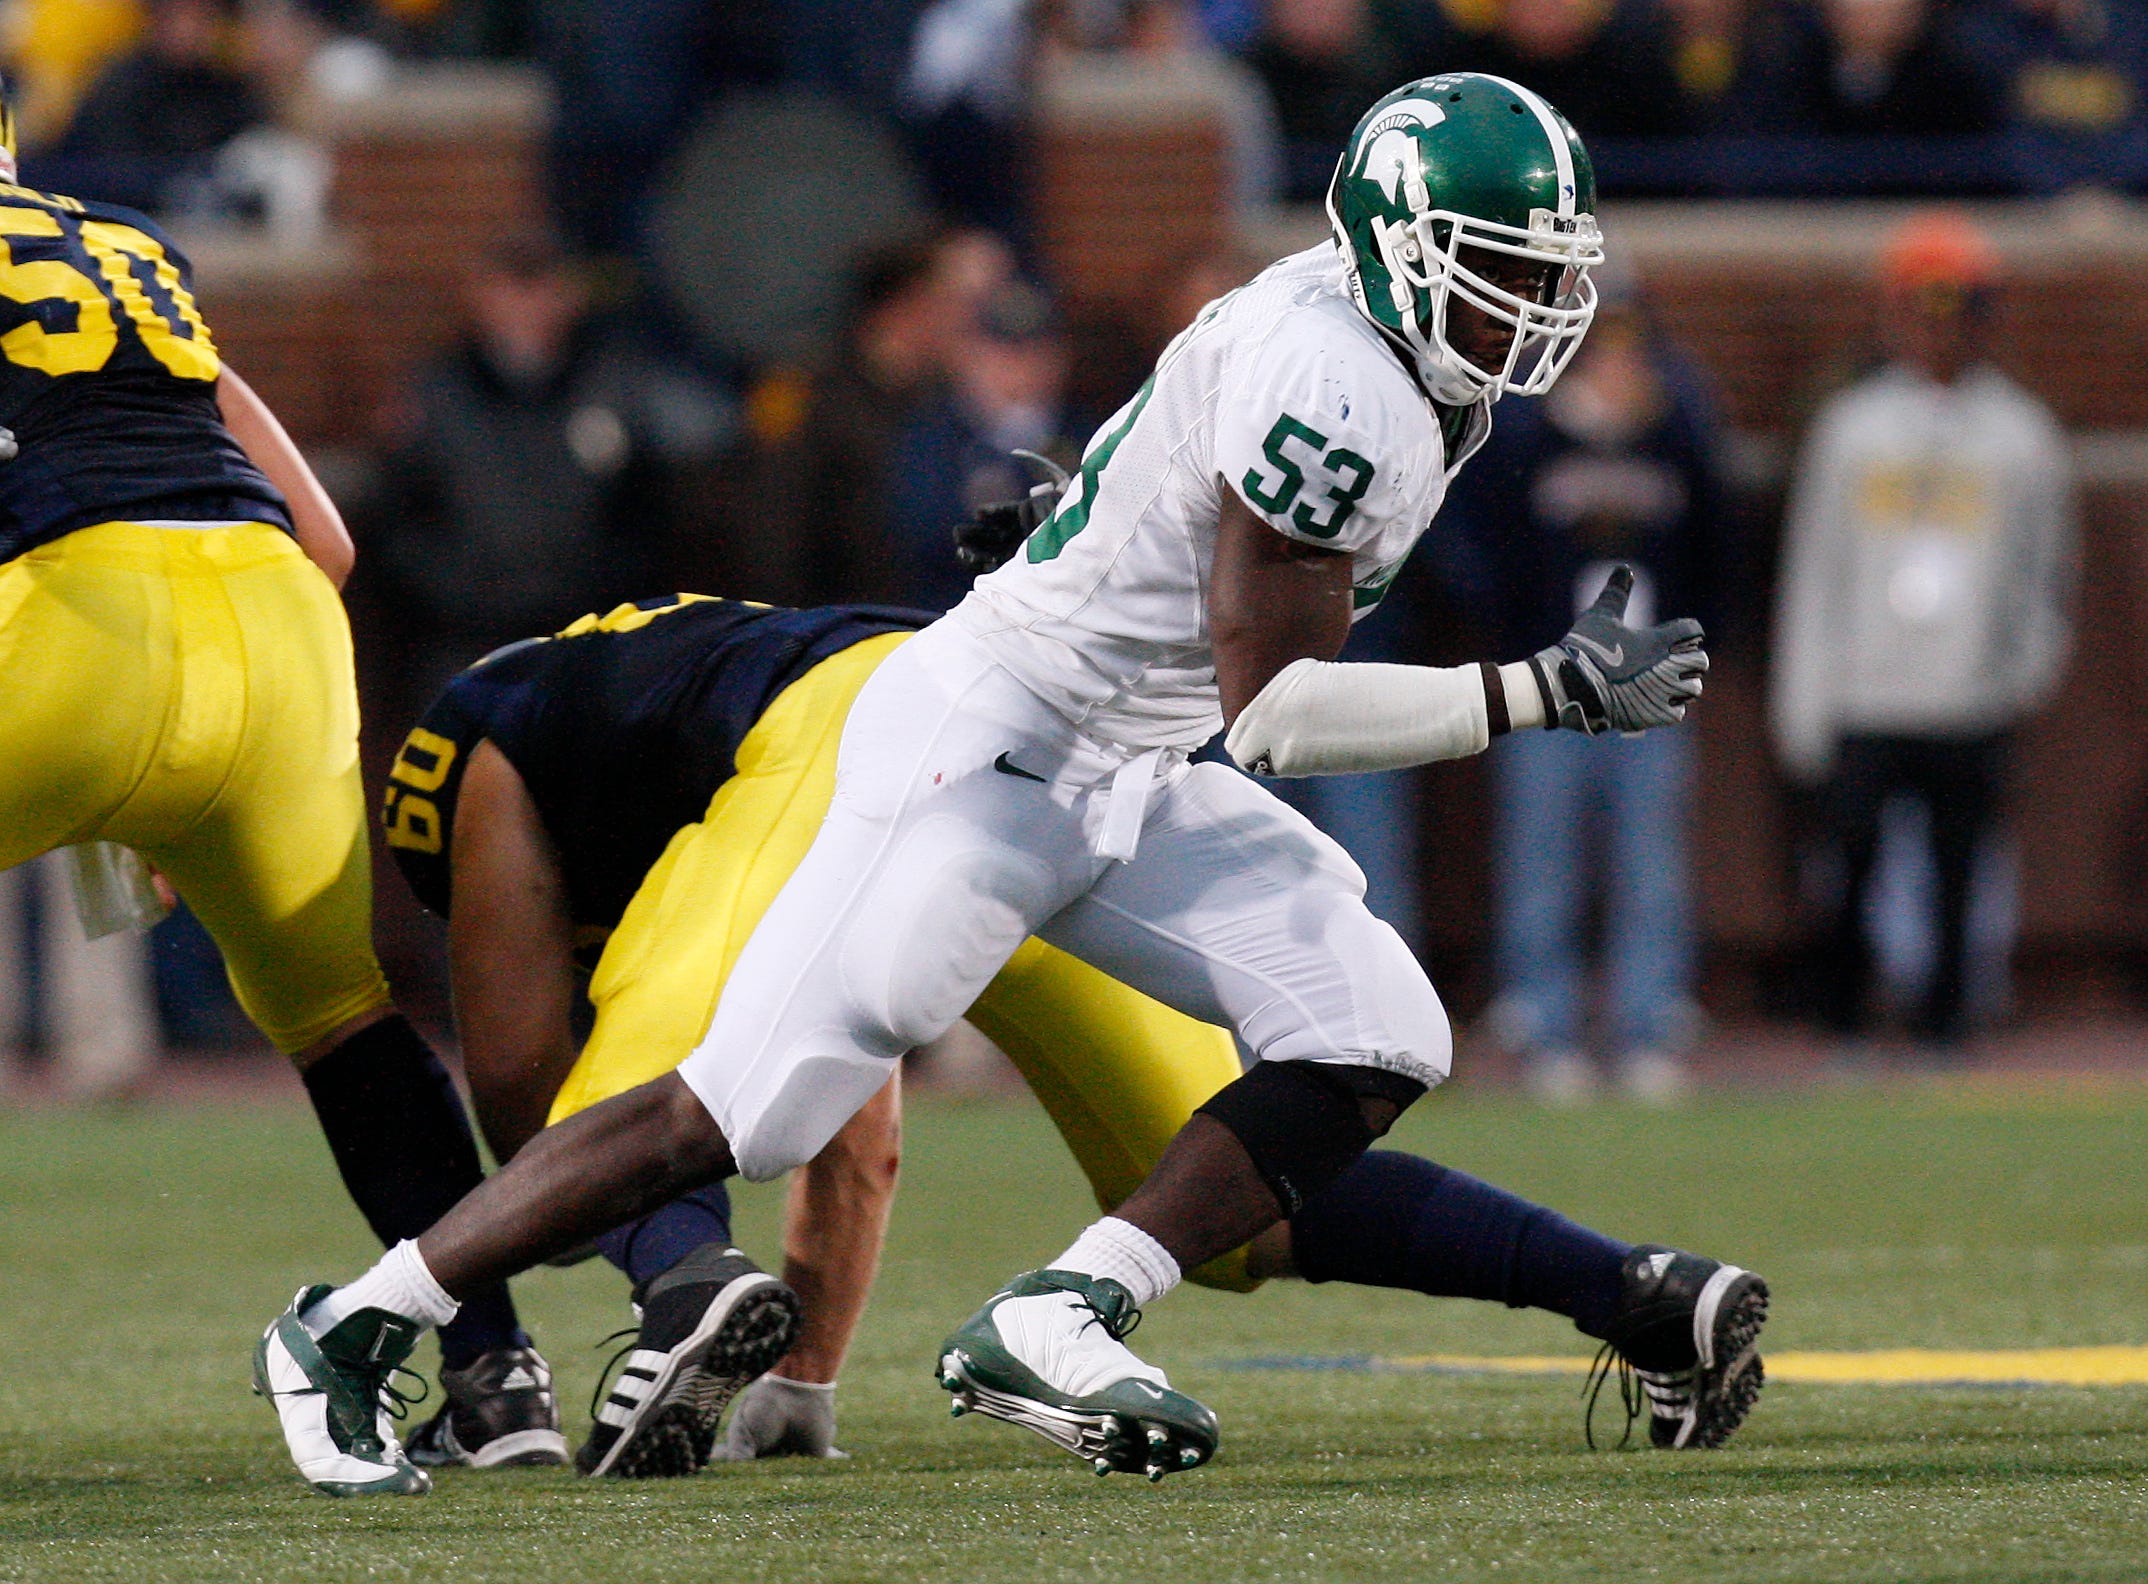 LINEBACKER – Greg Jones, 2007-10: Jones earned consensus All-American honors as both a junior and senior, becoming the first Spartan to accomplish that feat in back-to-back seasons since Bubba Smith and George Webster in 1965-66. As a junior in 2009, Jones led the Big Ten and ranked third in the nation with 154 tackles and was named Big Ten Defensive Player of the Year. He also recorded 14 tackles for loss and nine sacks. As a senior, Jones became the first Spartan to reach the 100-tackle milestone in three straight seasons since Percy Snow (1987-89). His 465 career tackles rank third in MSU history.